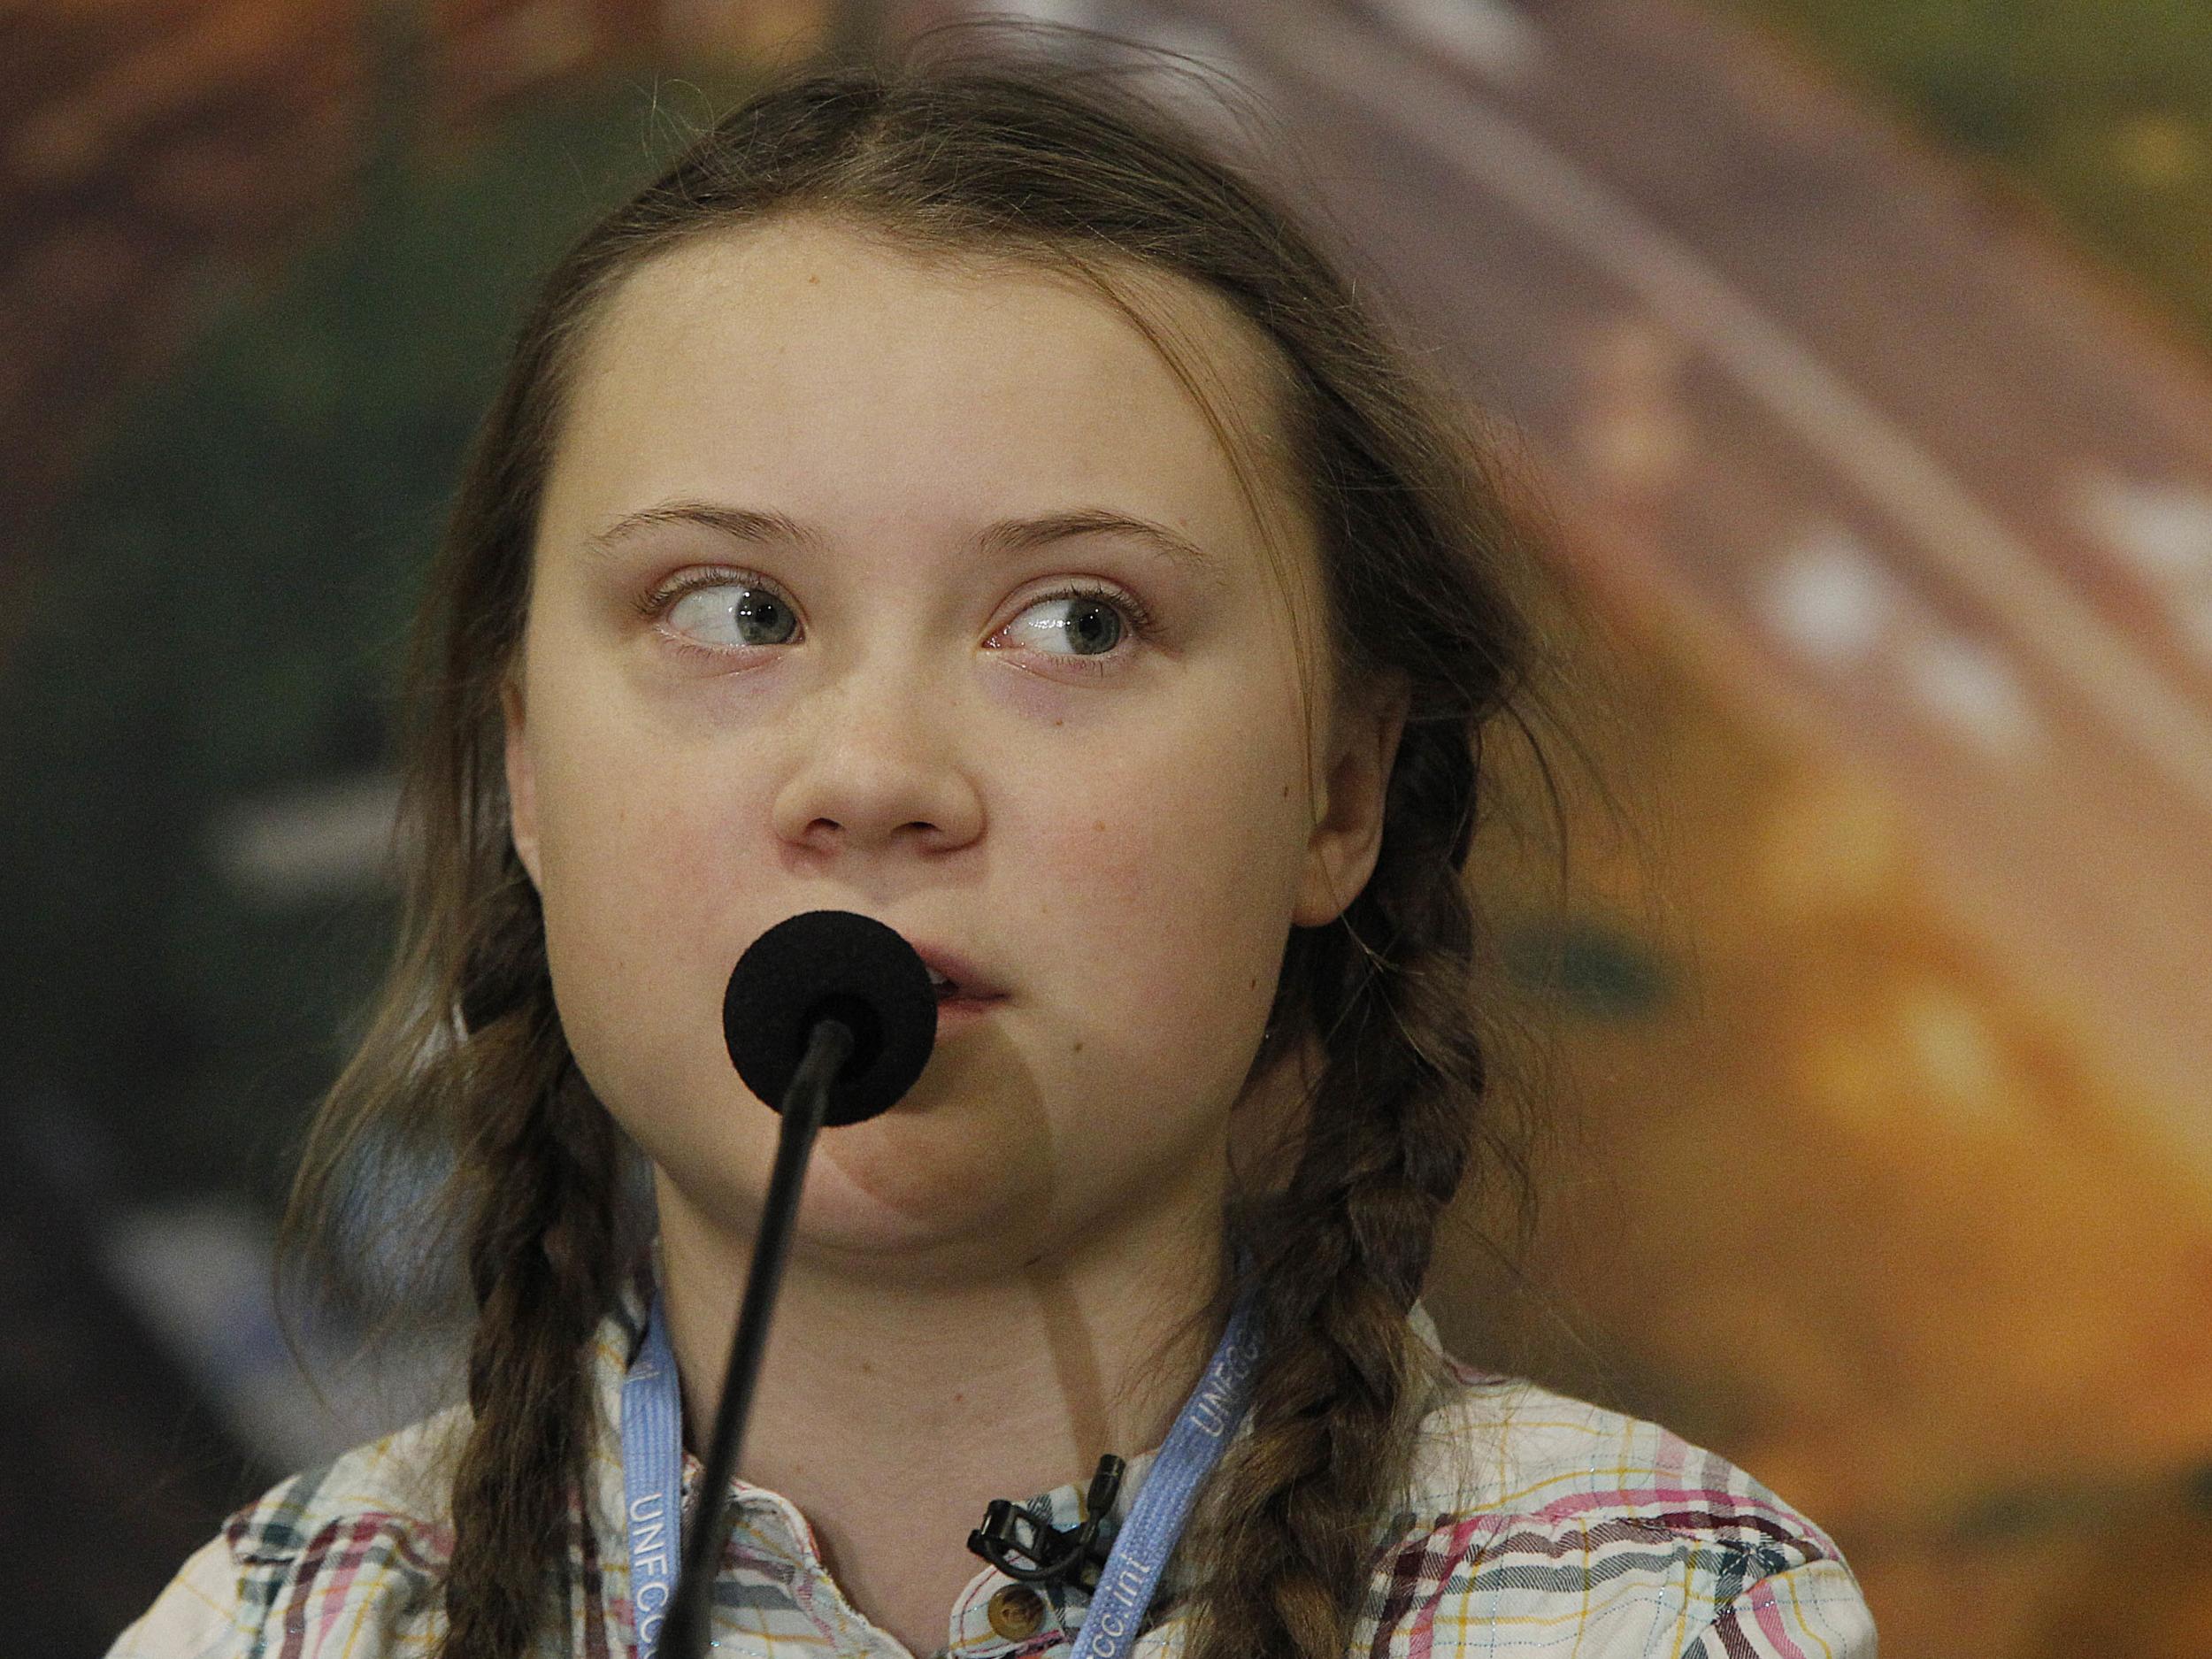 Greta Thunberg has played truant from school, and encouraged others to do the same, in order to protest international inaction on climate change